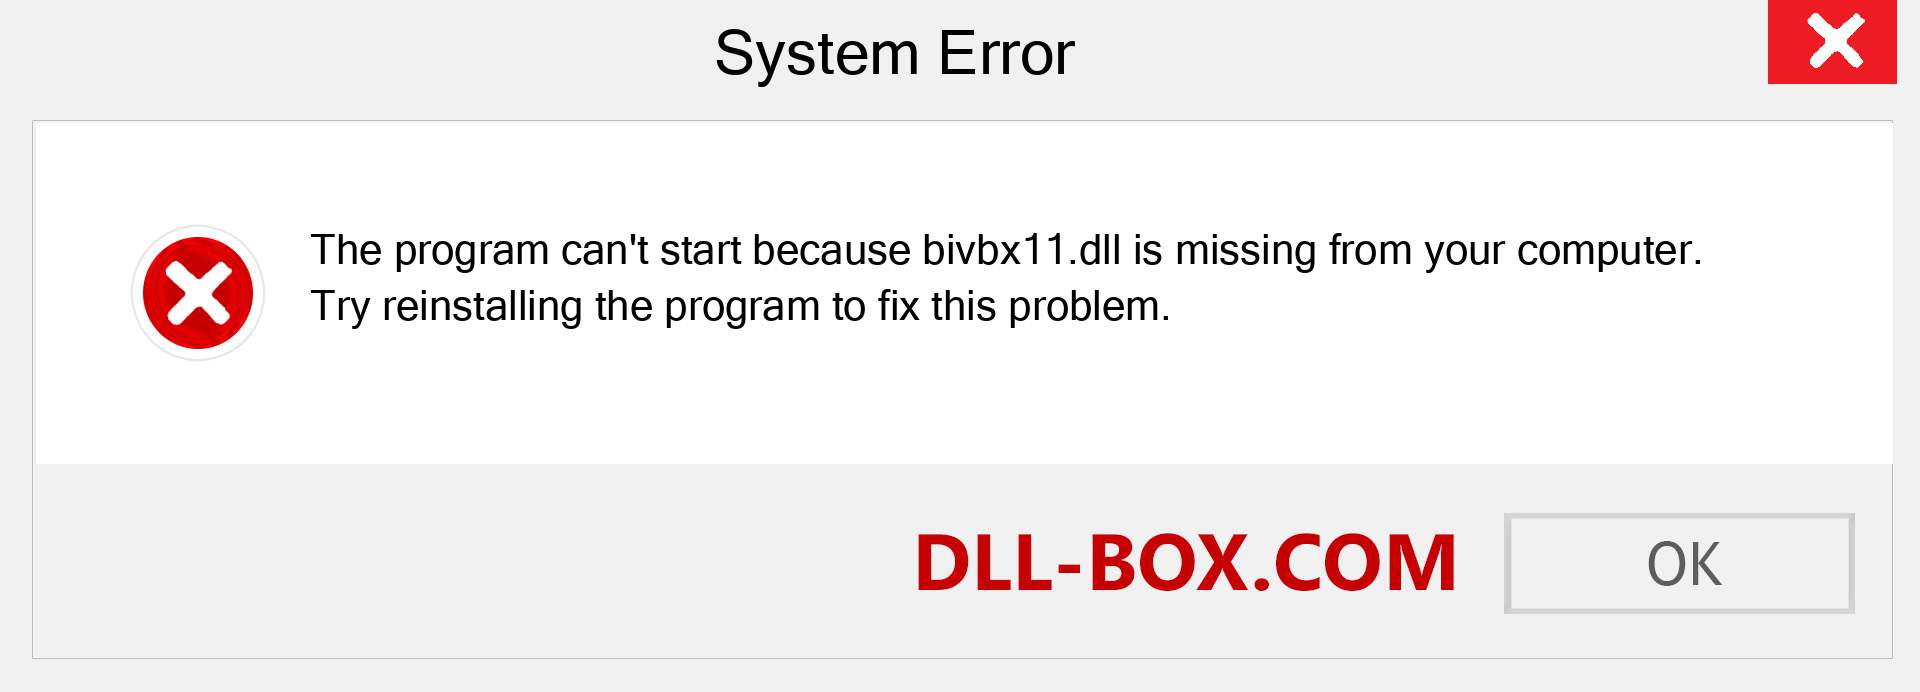  bivbx11.dll file is missing?. Download for Windows 7, 8, 10 - Fix  bivbx11 dll Missing Error on Windows, photos, images